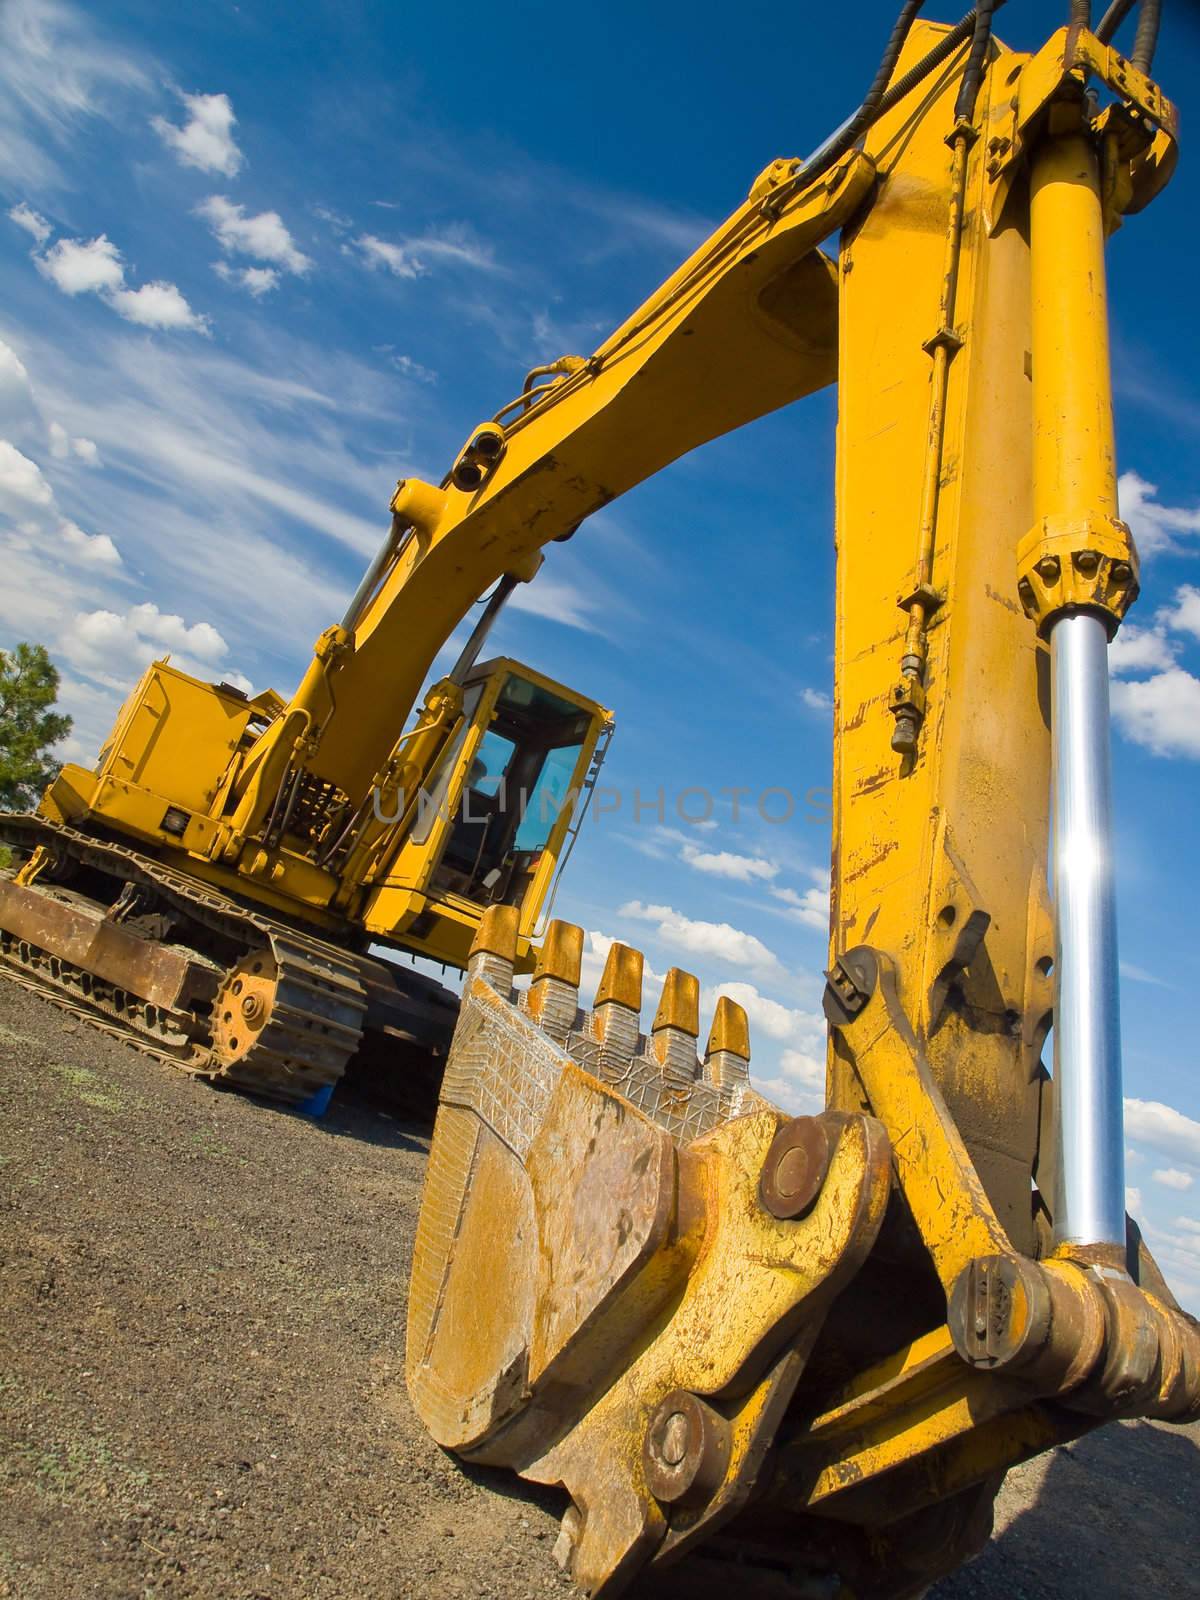 Heavy Duty Construction Equipment Parked at Worksite 